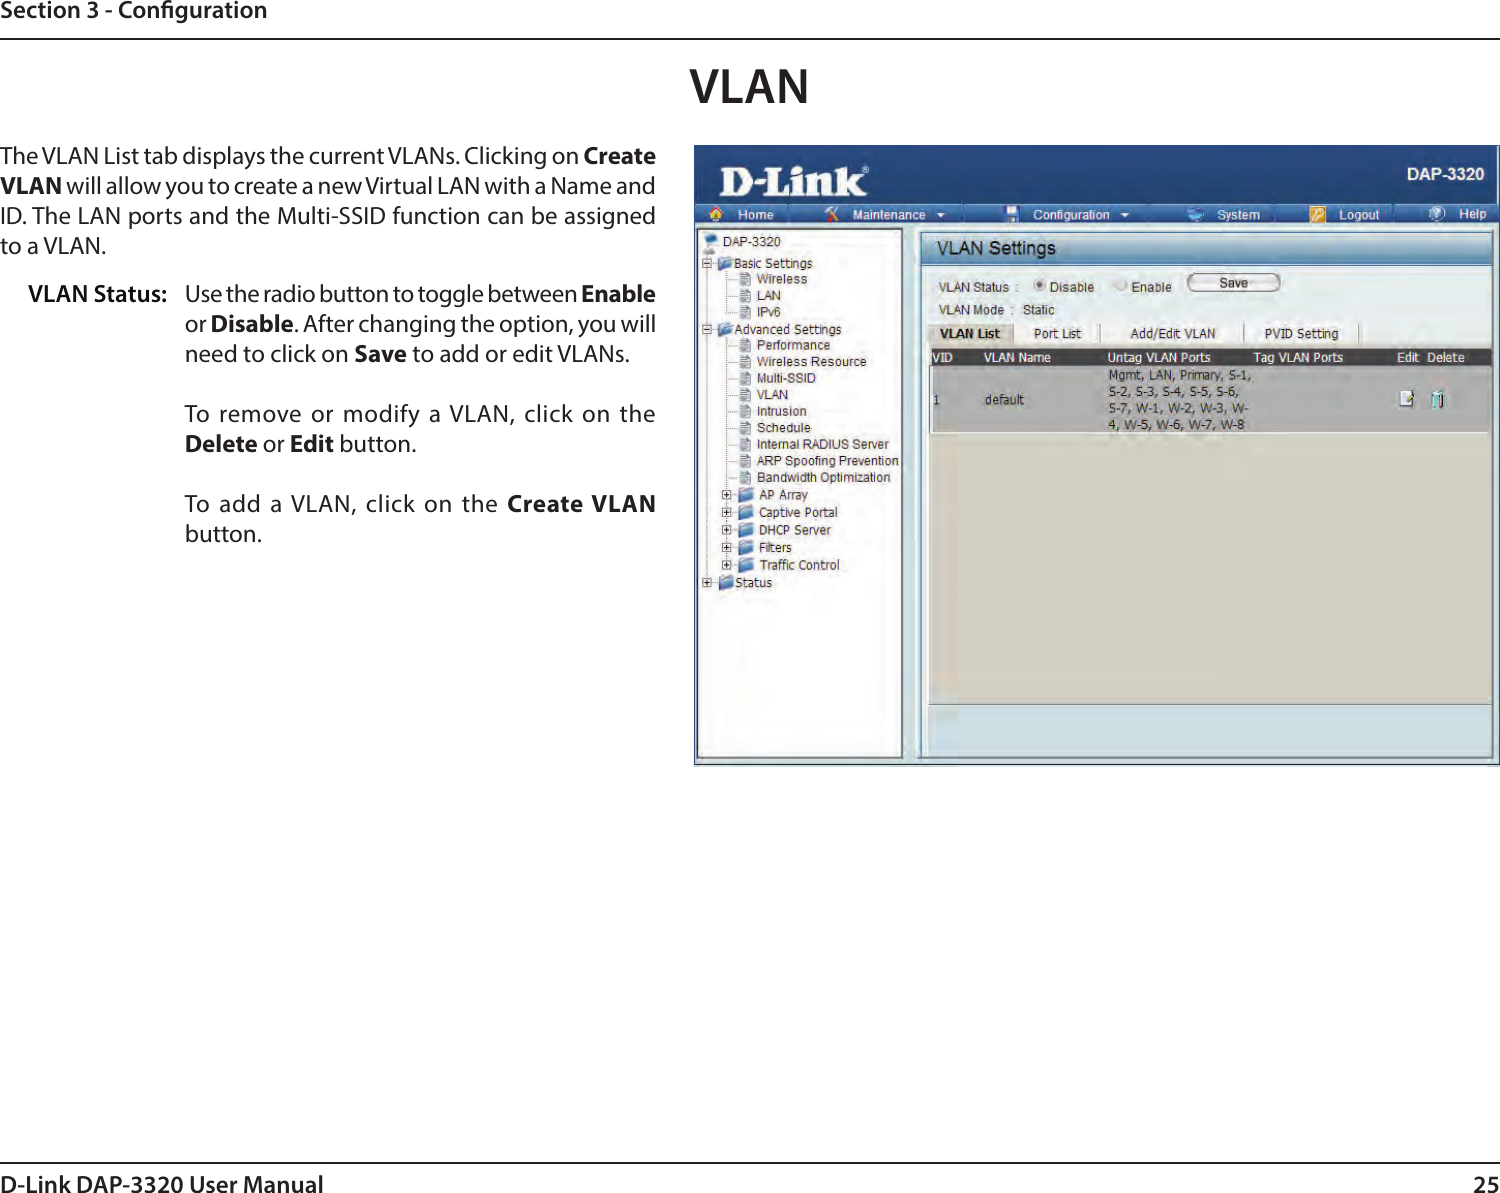 25D-Link DAP-3320 User ManualSection 3 - CongurationVLANThe VLAN List tab displays the current VLANs. Clicking on Create VLAN will allow you to create a new Virtual LAN with a Name and ID. The LAN ports and the Multi-SSID function can be assigned to a VLAN.Use the radio button to toggle between Enable or Disable. After changing the option, you will need to click on Save to add or edit VLANs.To remove or modify a VLAN, click on the Delete or Edit button.To add a VLAN, click on the Create VLAN button.VLAN Status: